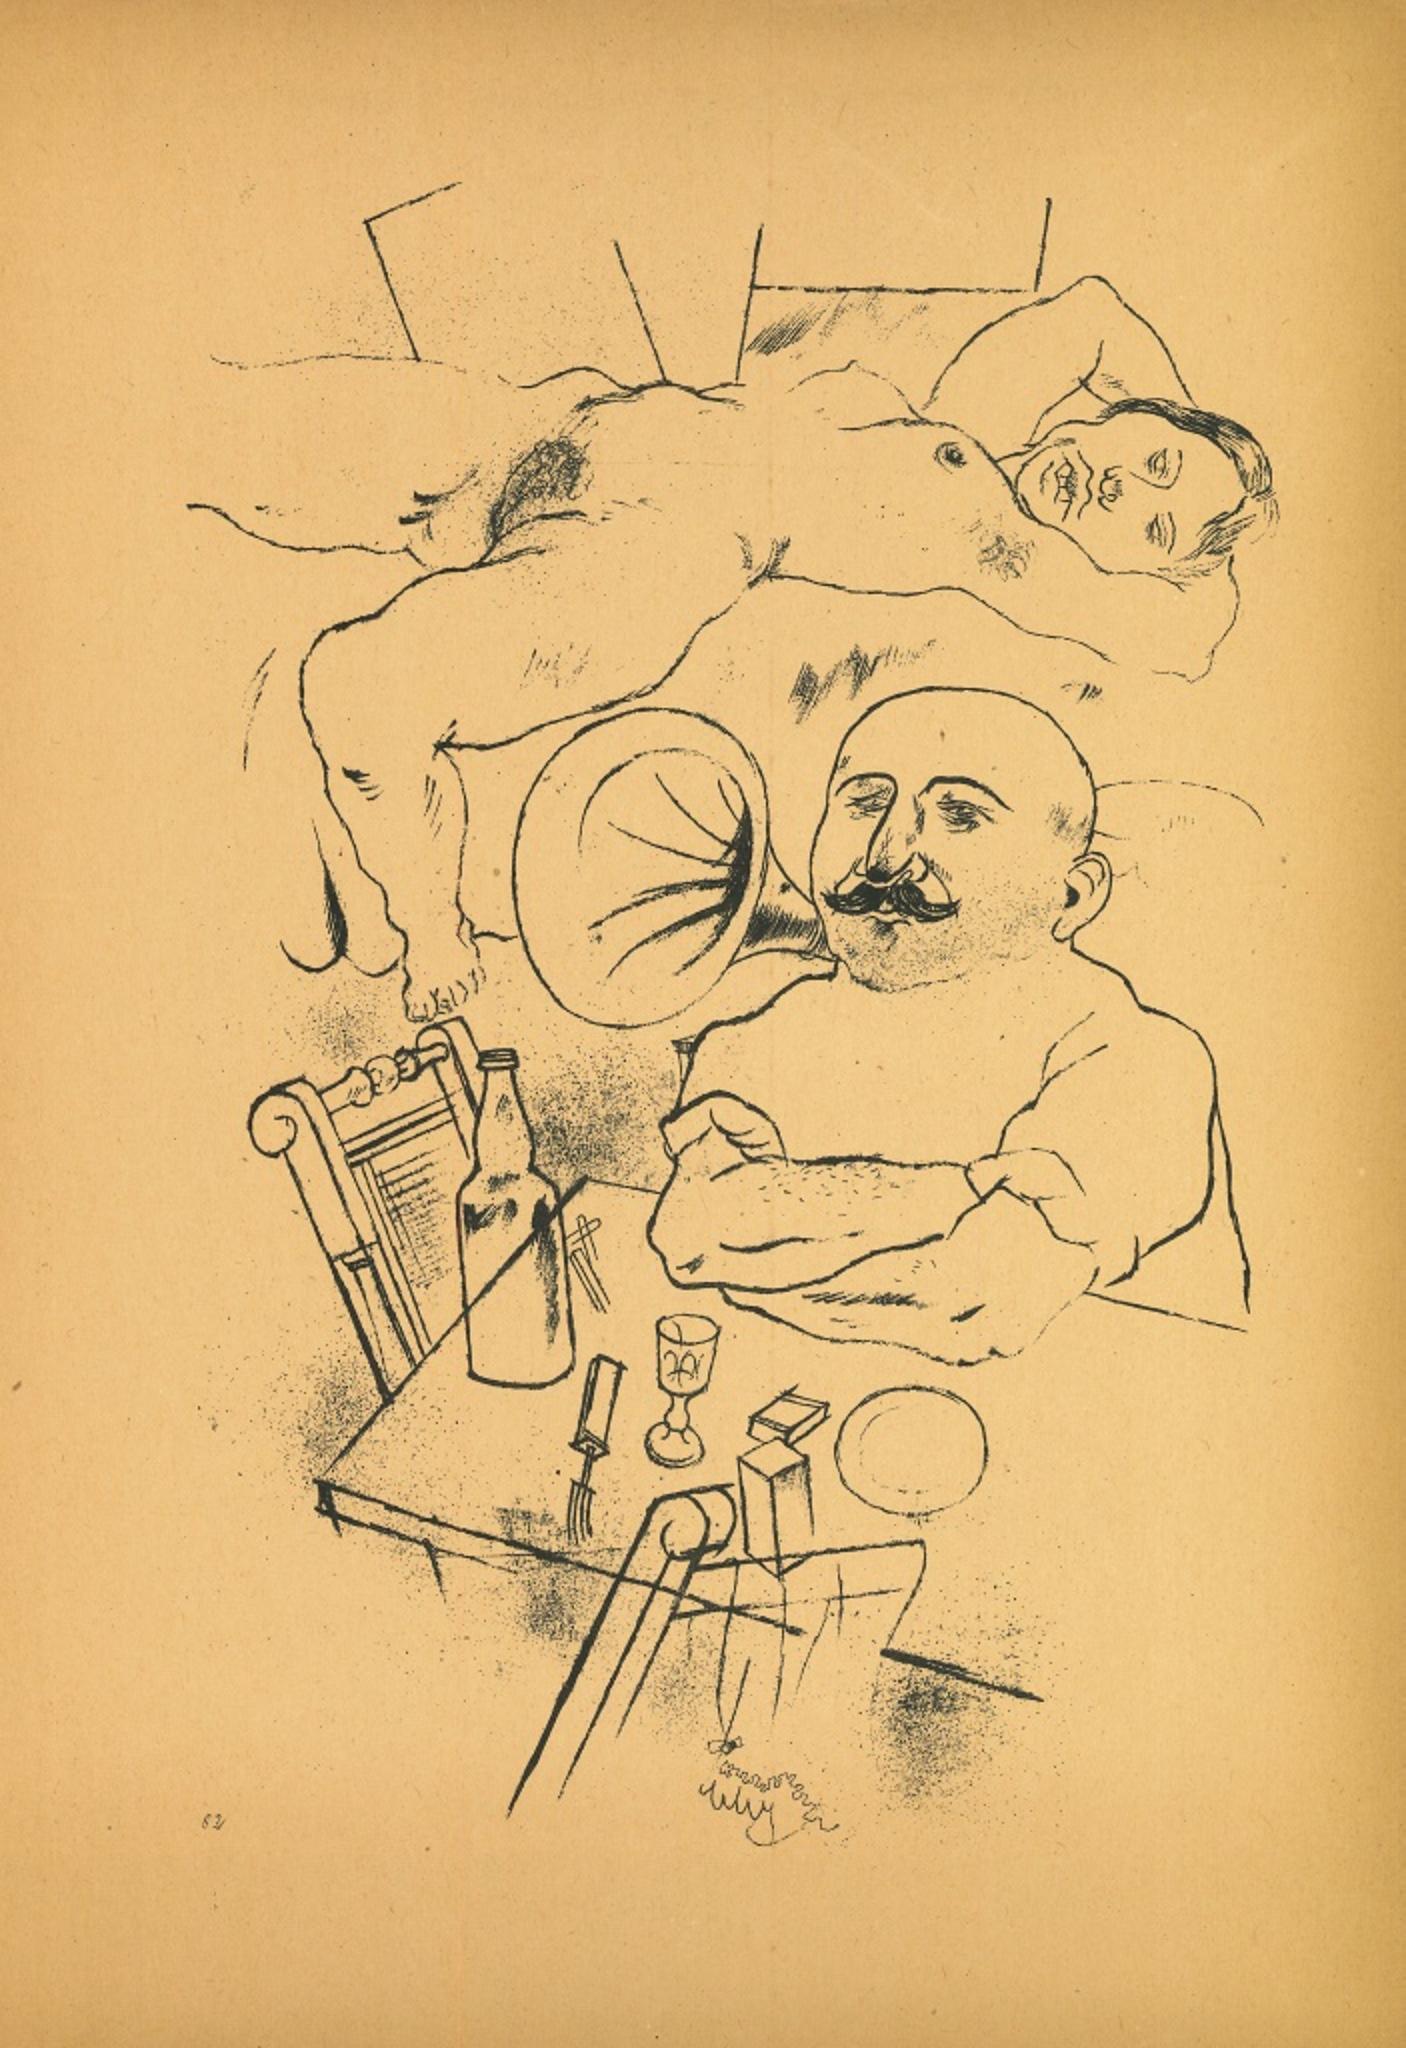 Dream - Original Offset and Lithograph by George Grosz - 1923